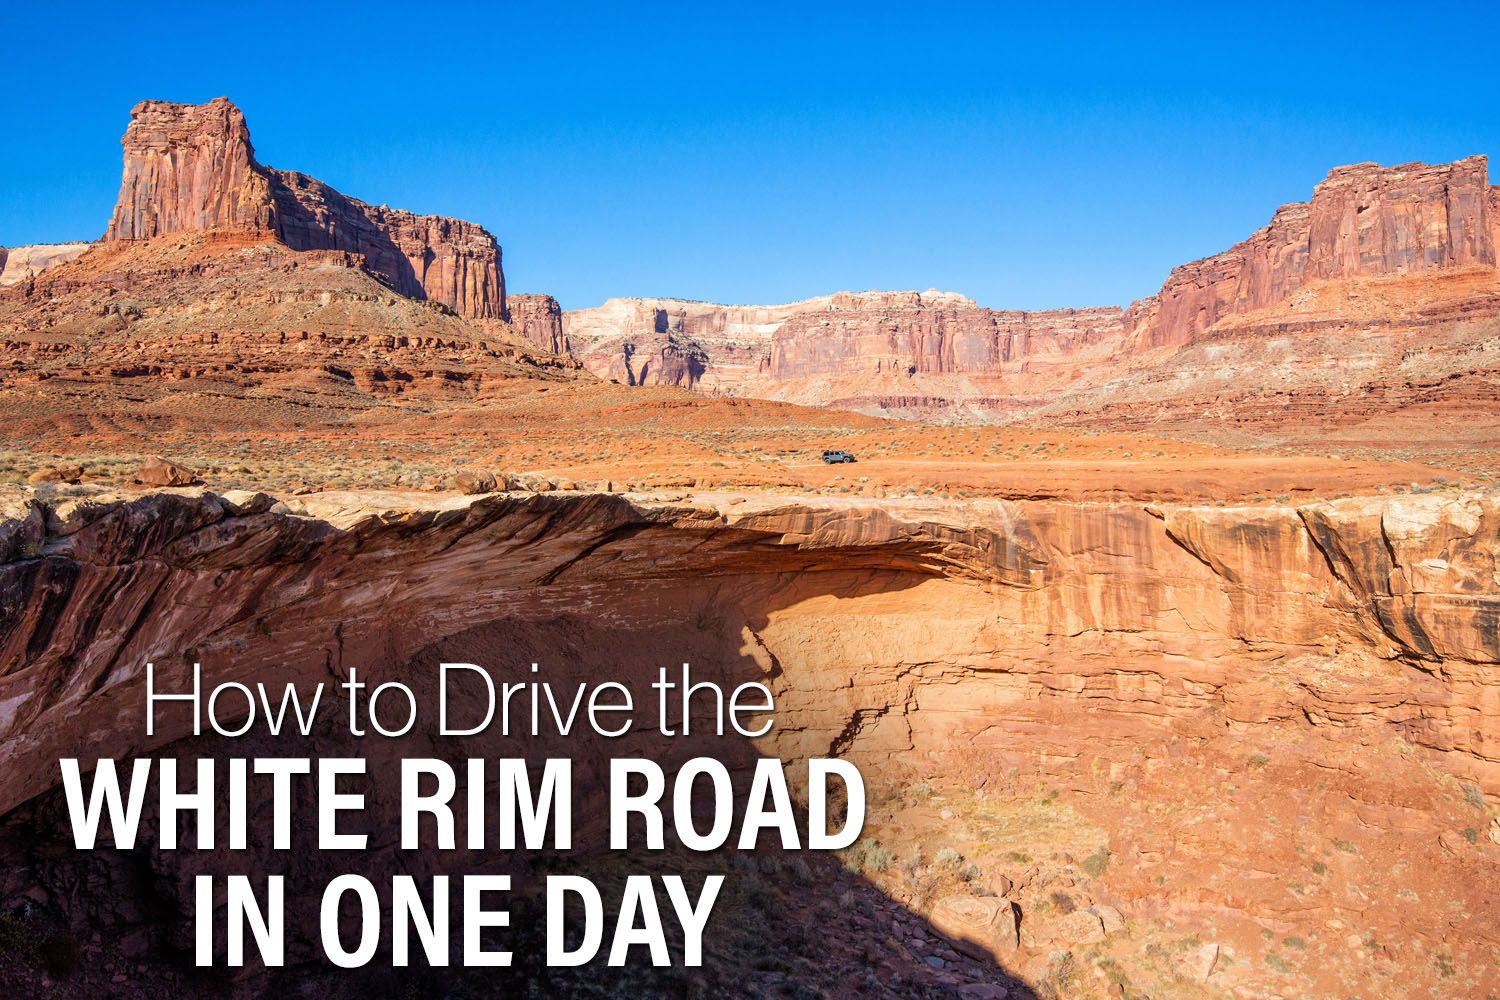 White Rim Road in One Day